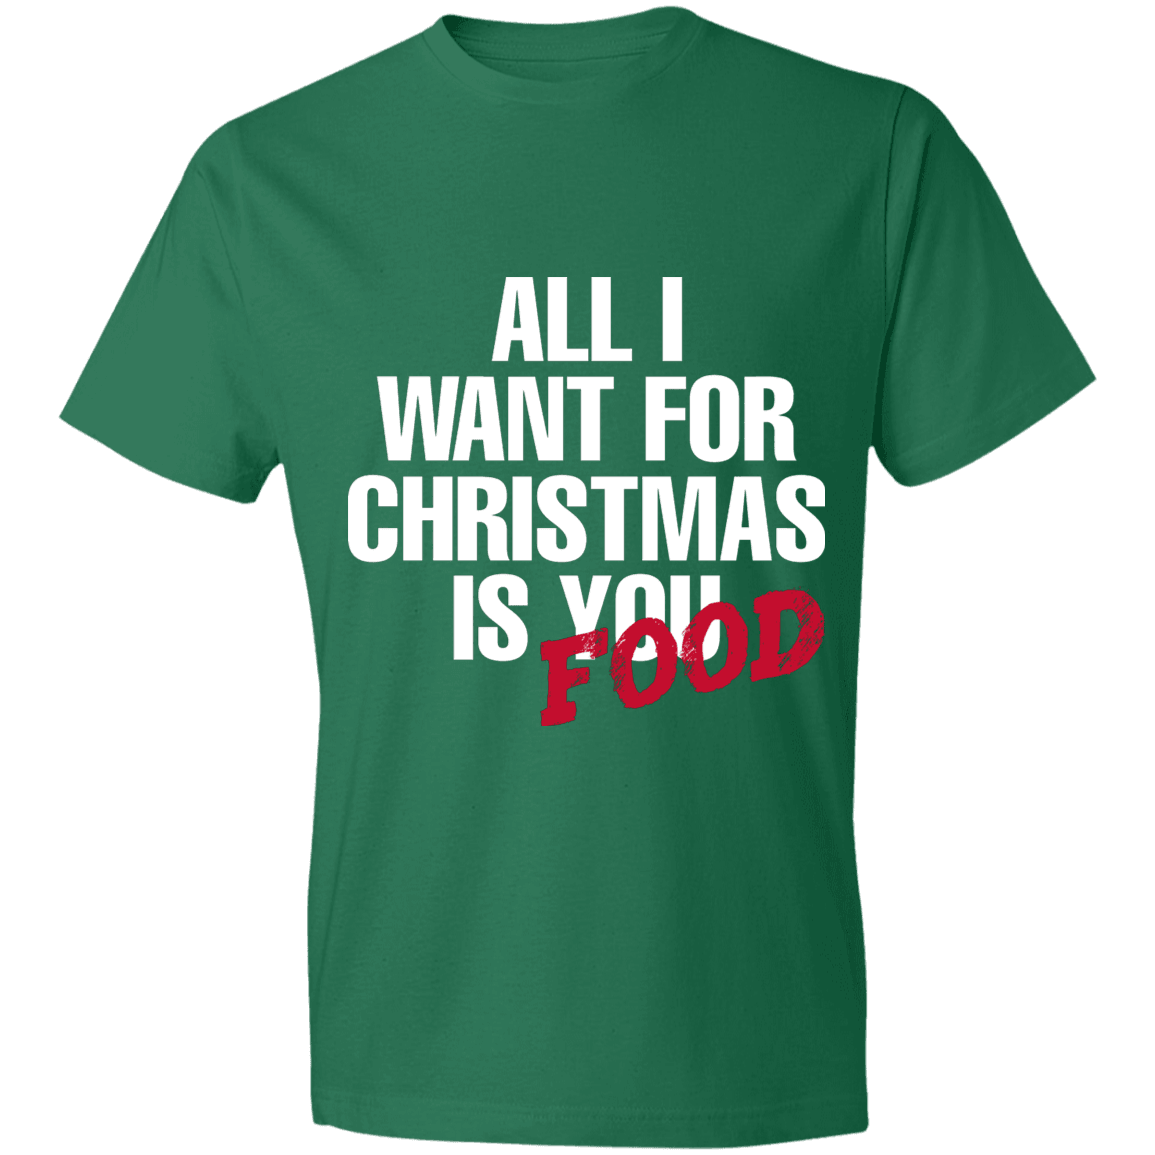 Designs by MyUtopia Shout Out:All I Want For Christmas Is Food - Lightweight Unisex T-Shirt,Kelly Green / S,Adult Unisex T-Shirt